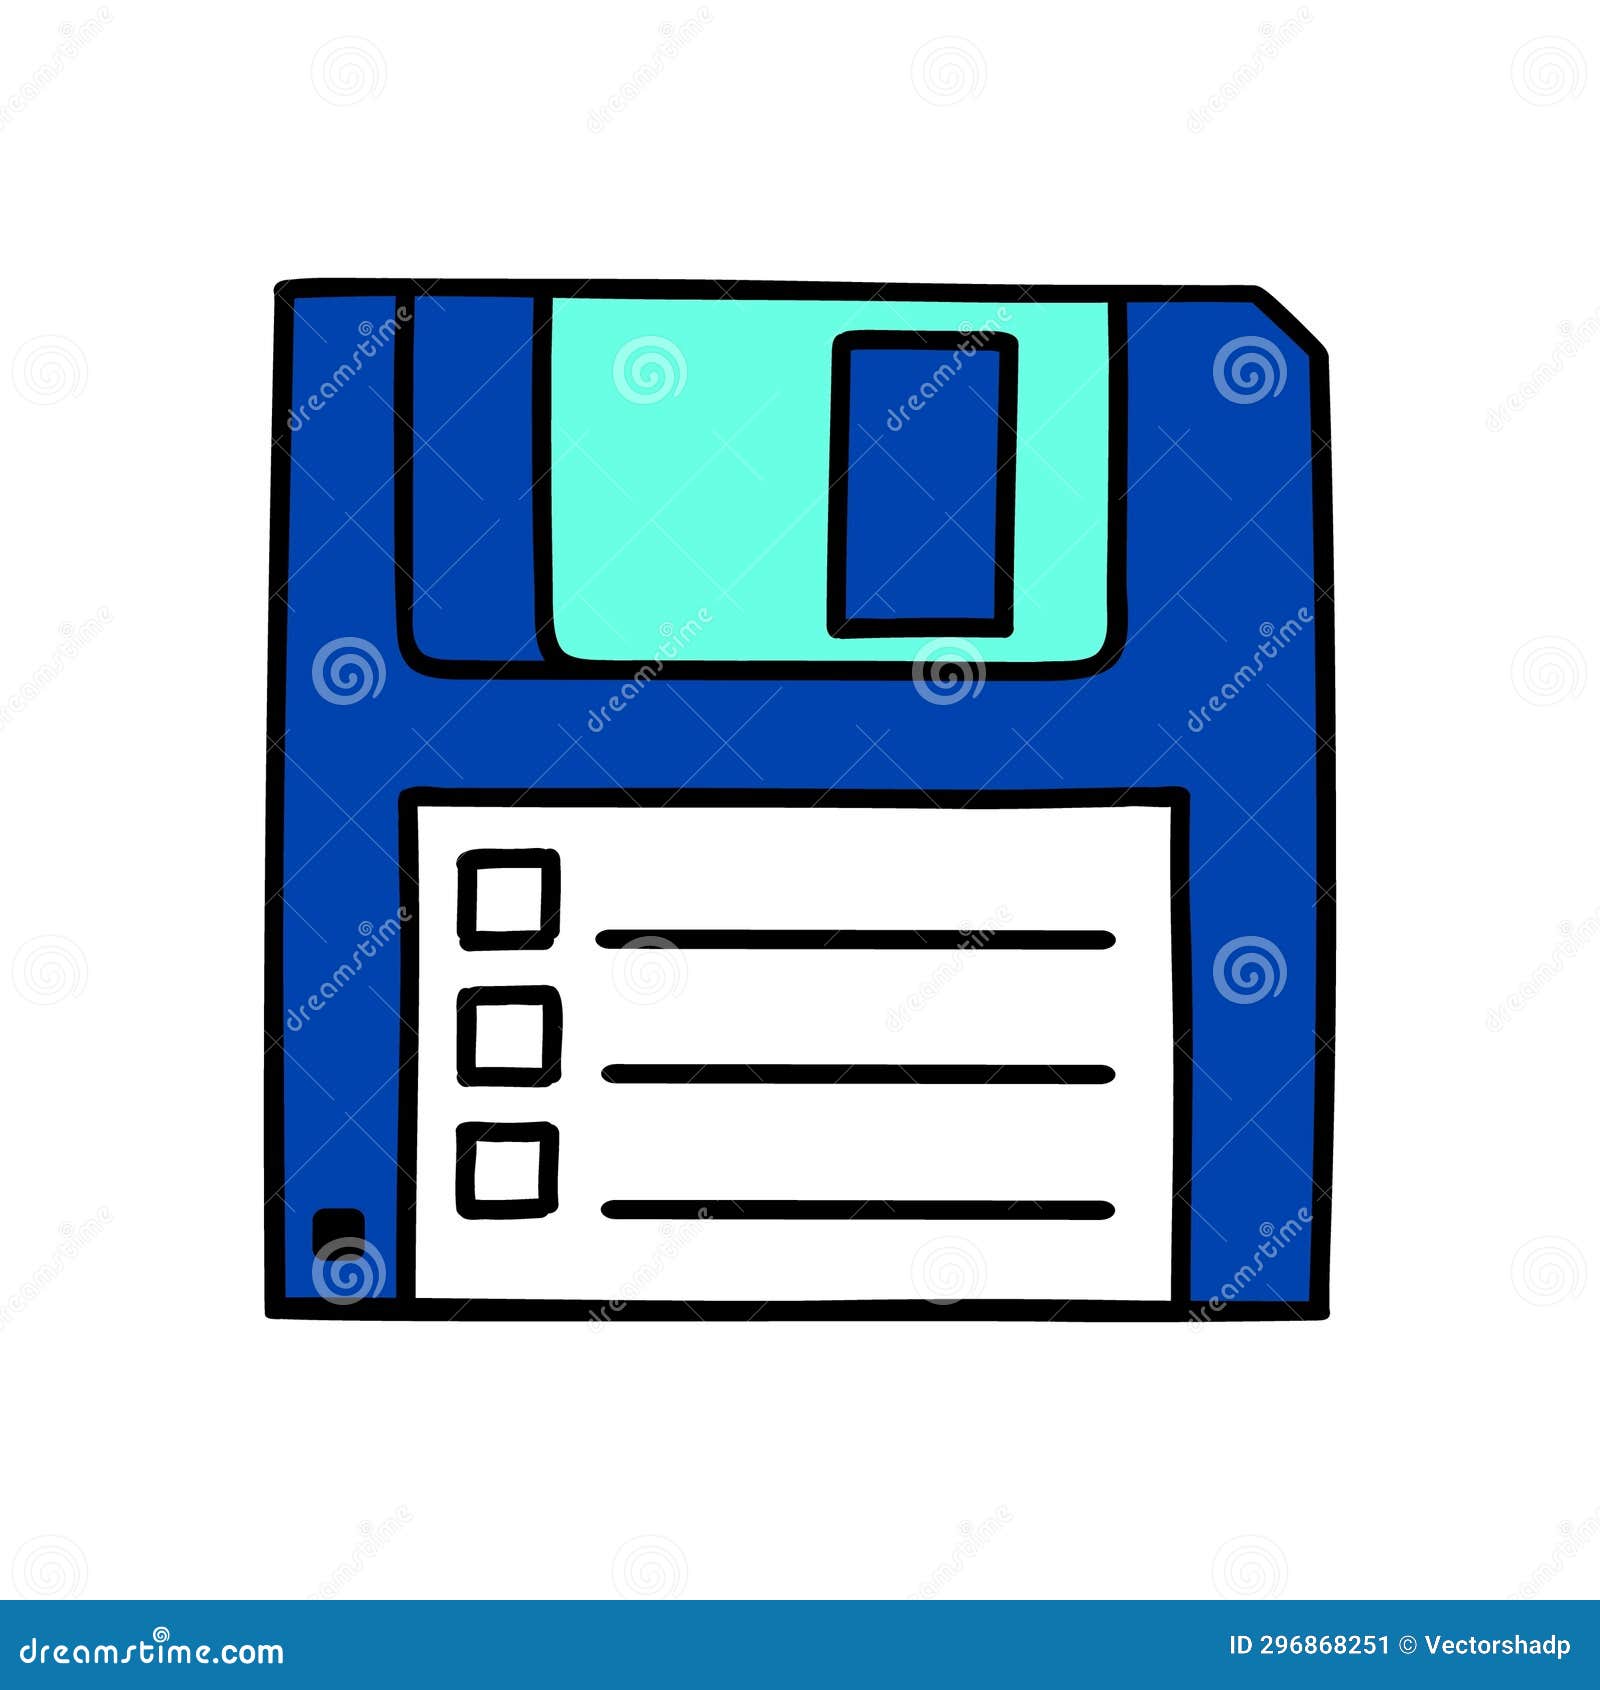 floppy disk retro doodle . nostalgic 1990s disquette . 90s and 00s style hand drawn object